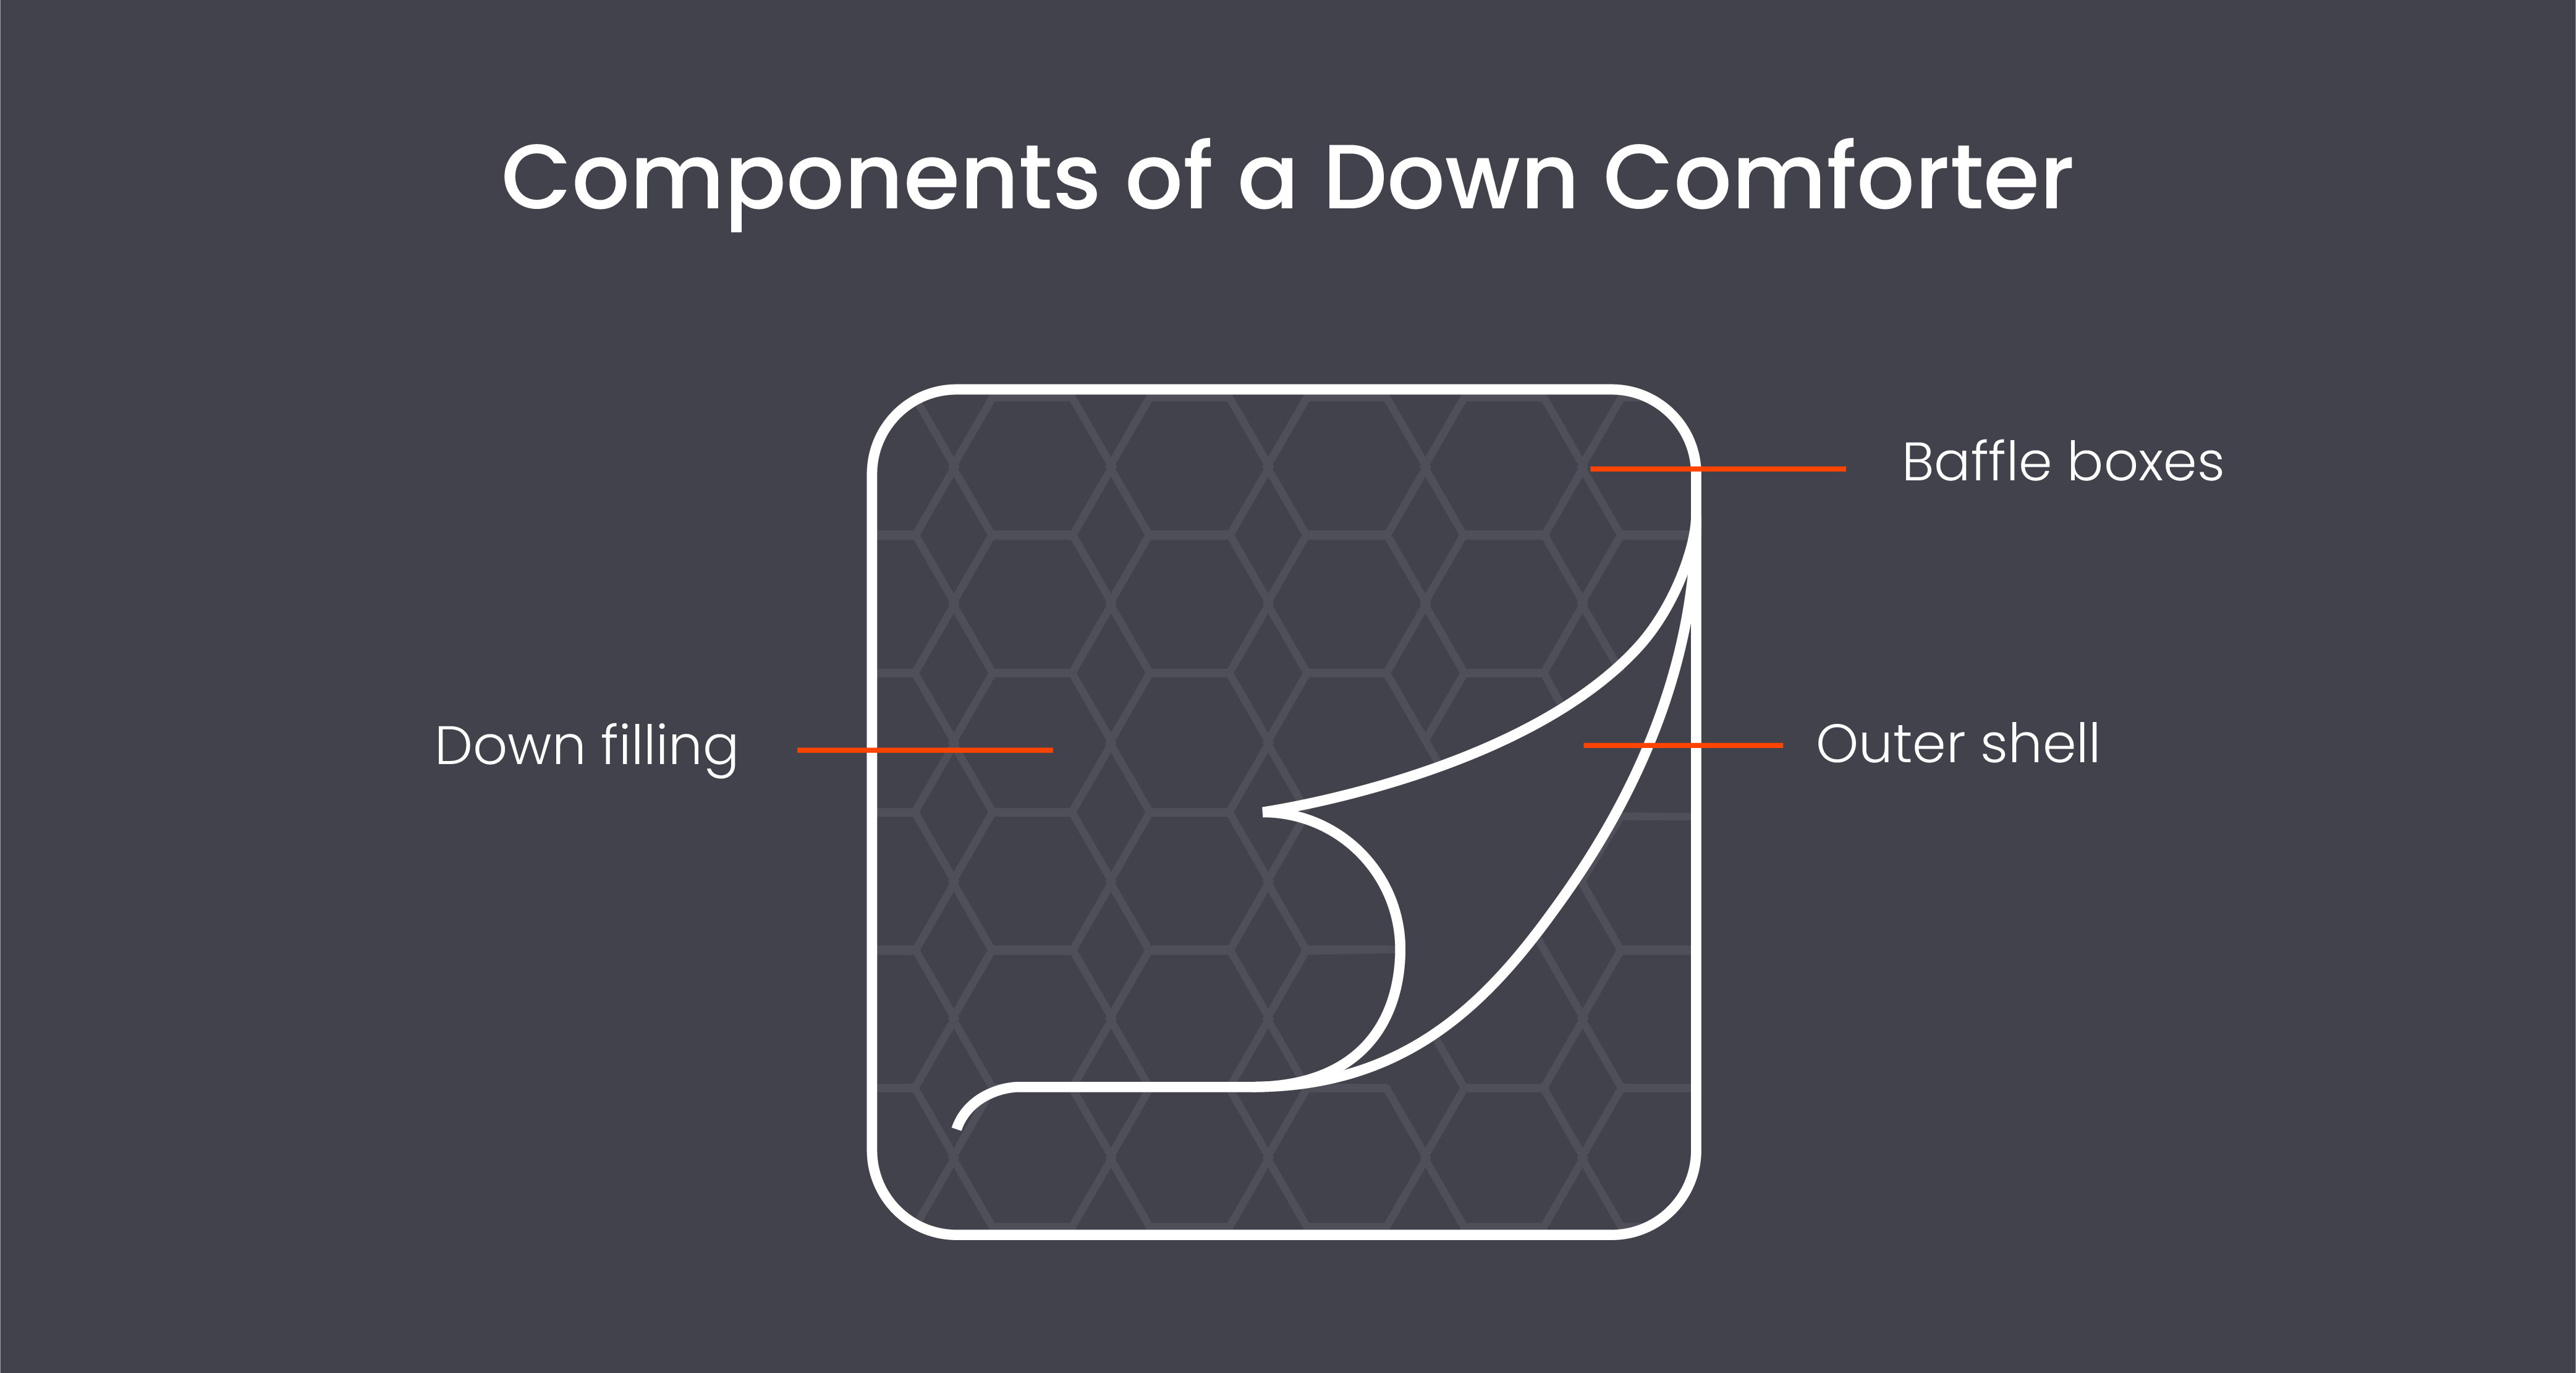 Components of a down comforter